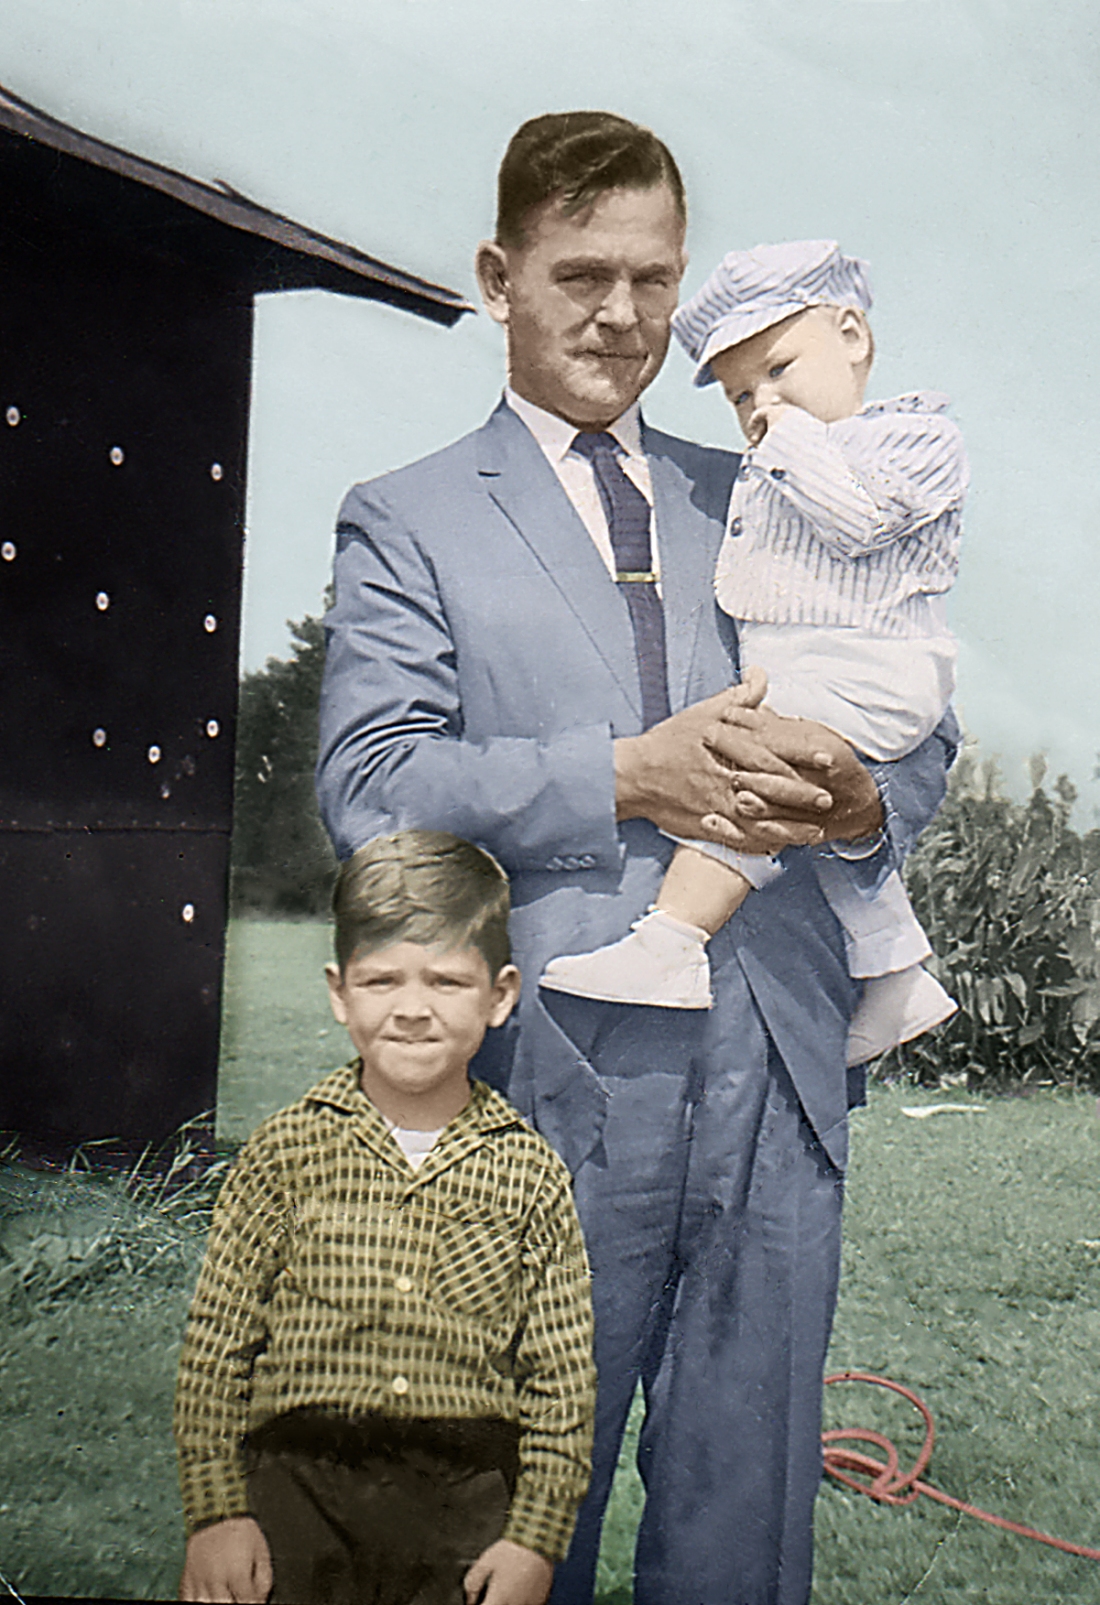 Restored and colorized photo